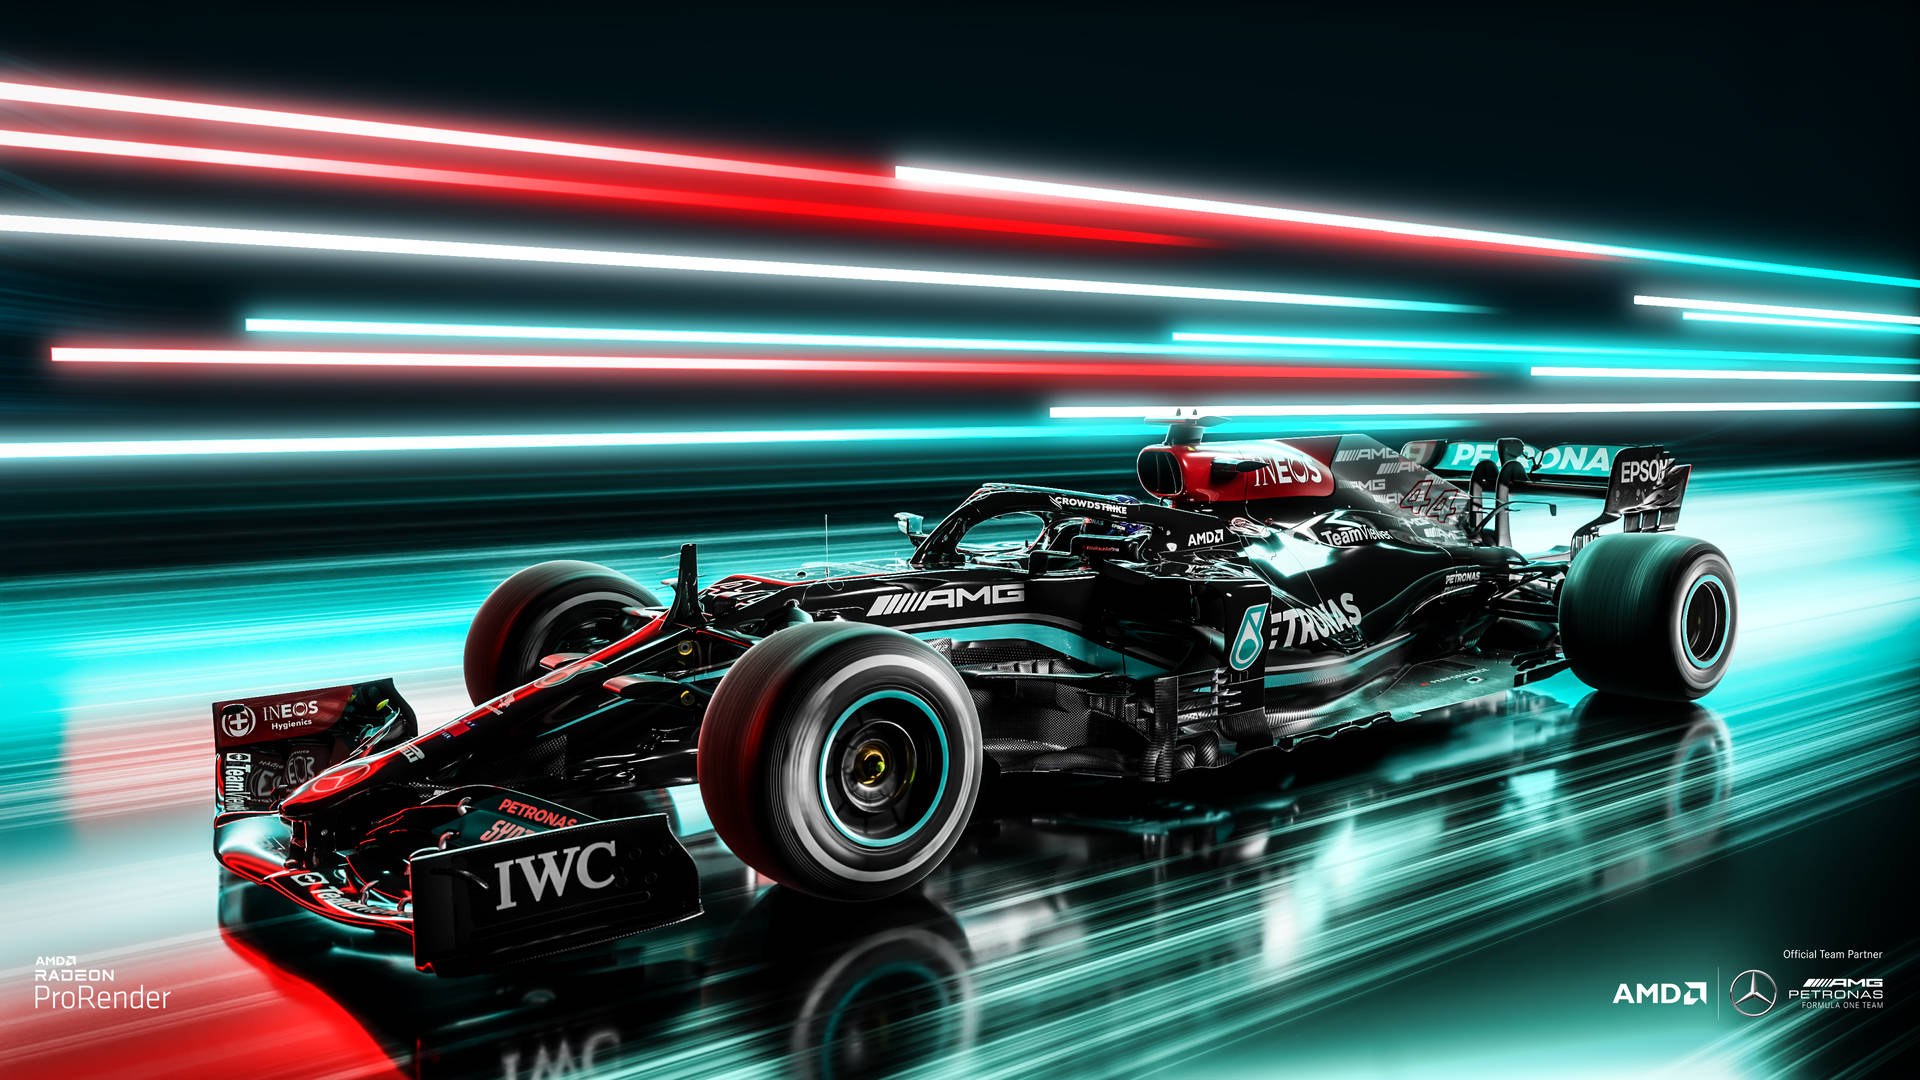 Vibrant Cool F1 Background